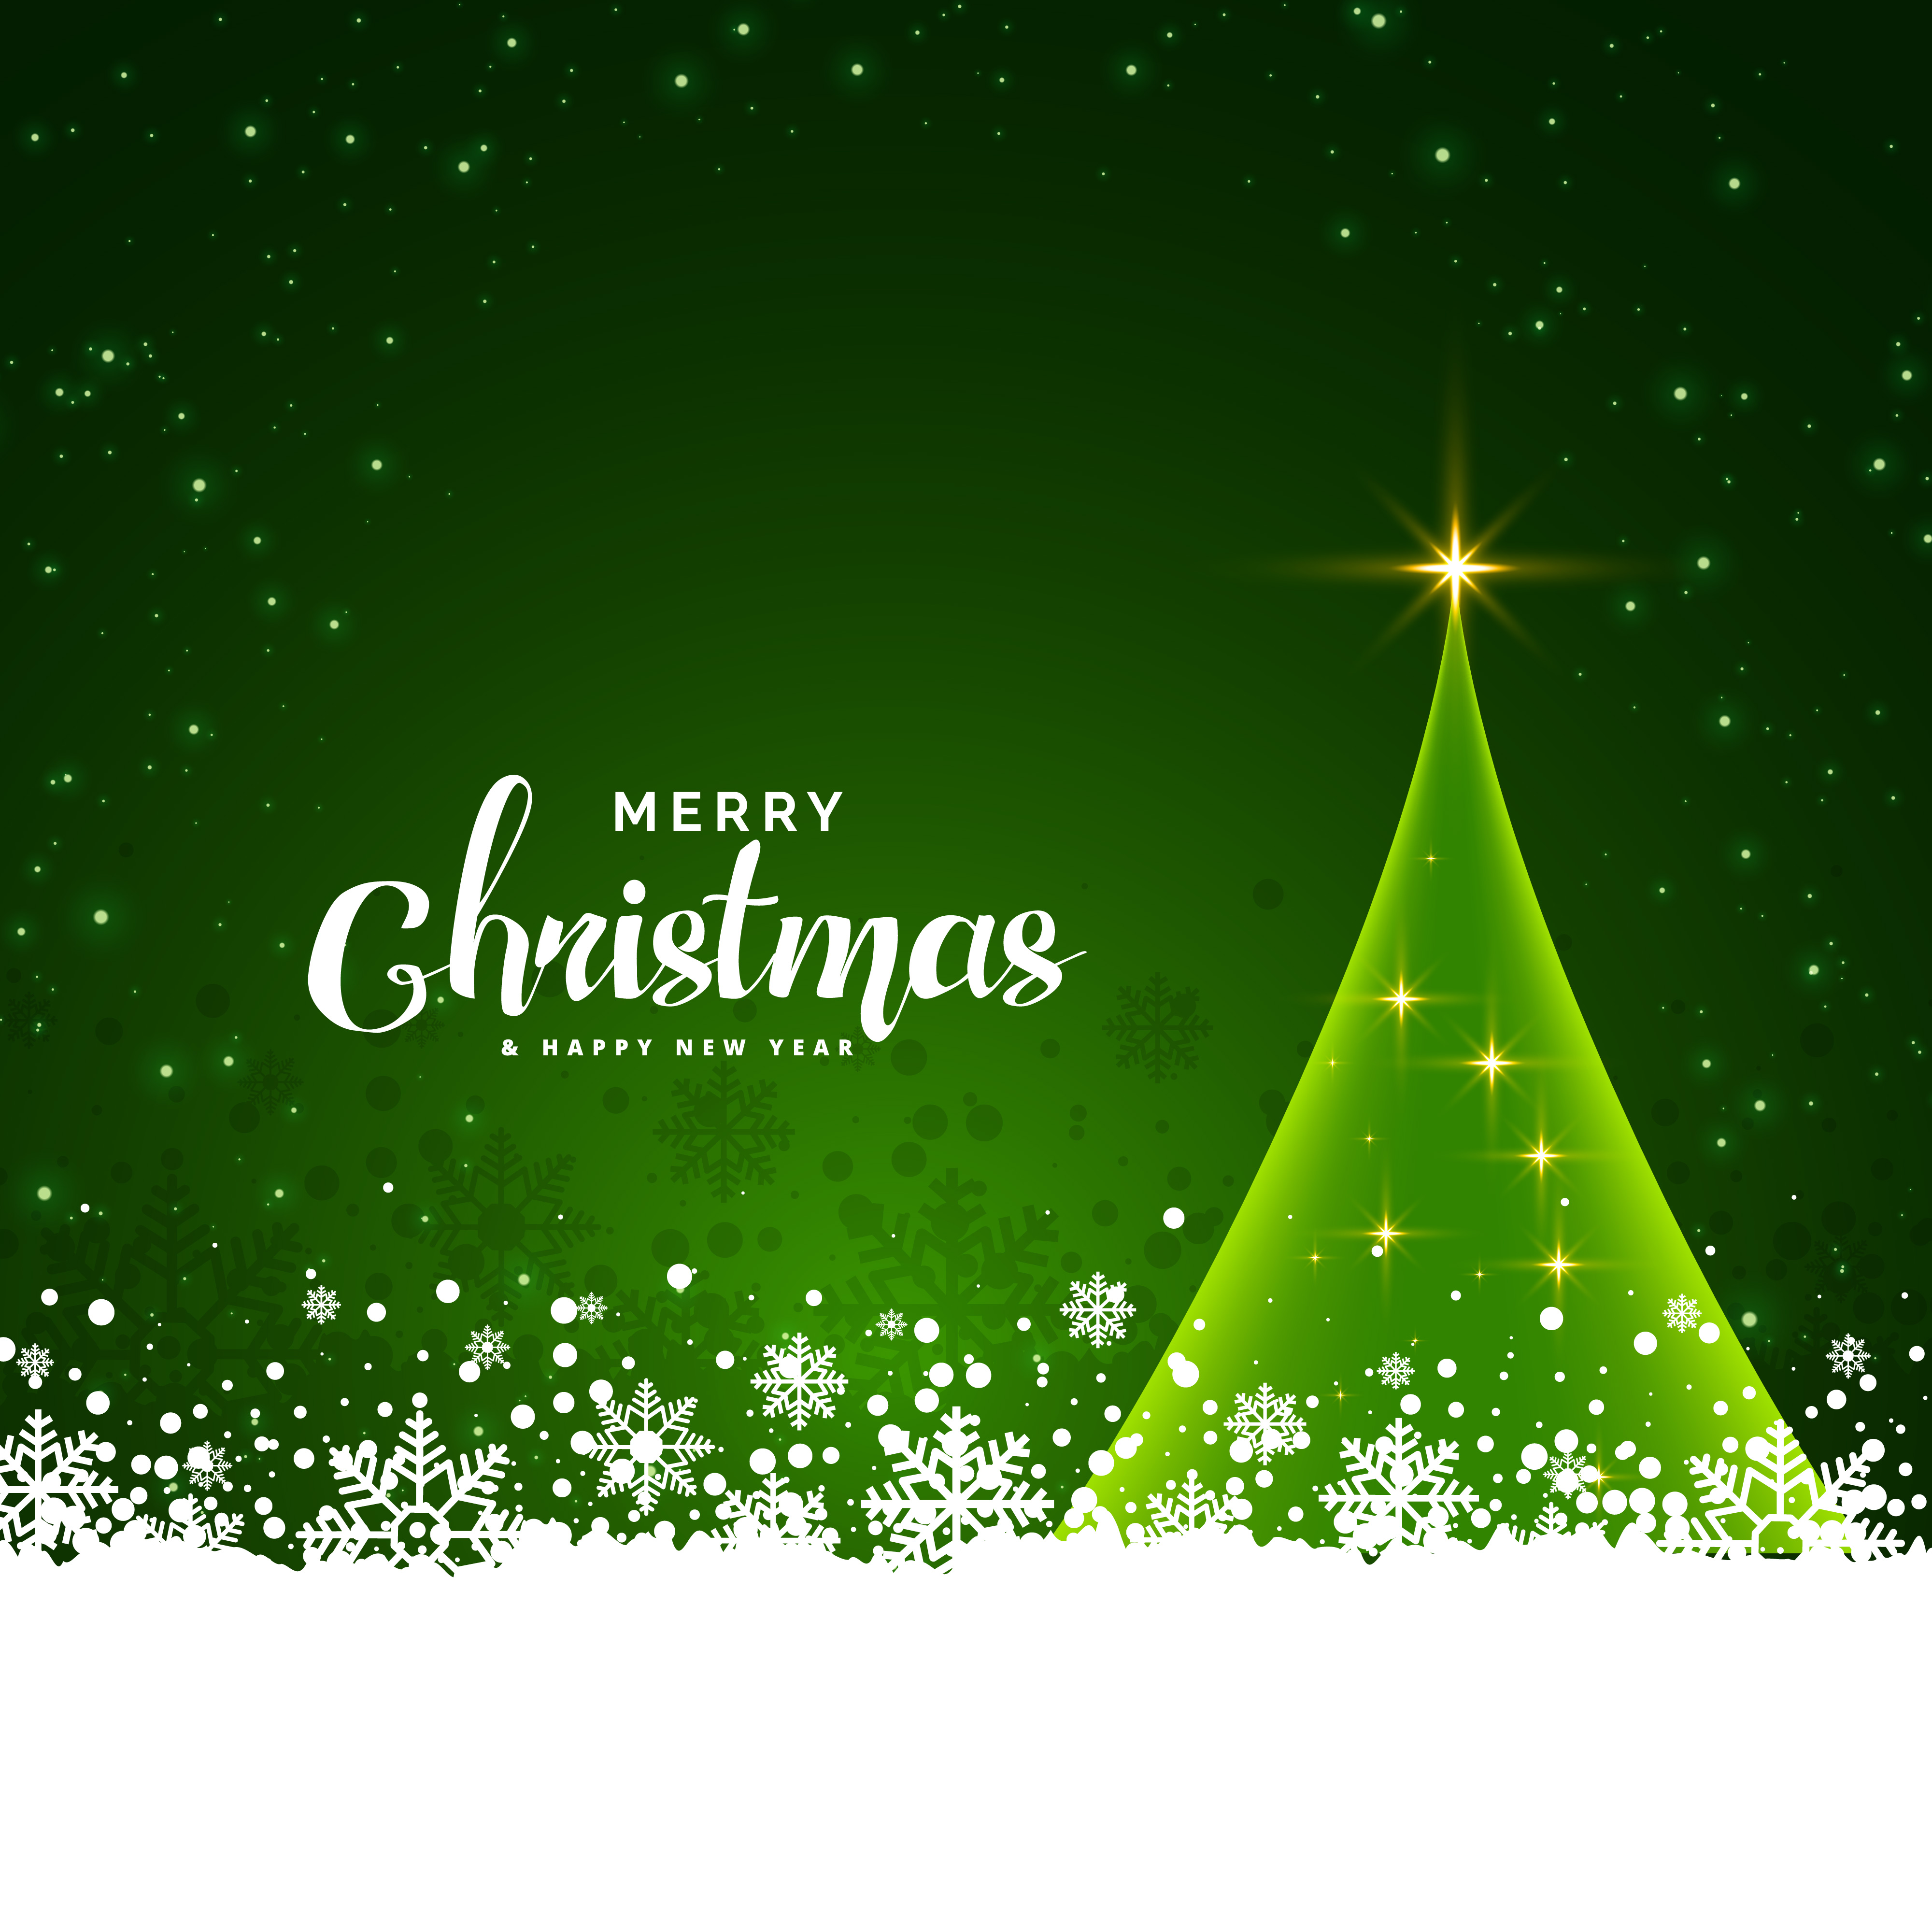 green-christmas-card-design-with-snowflakes-background-download-free-vector-art-stock